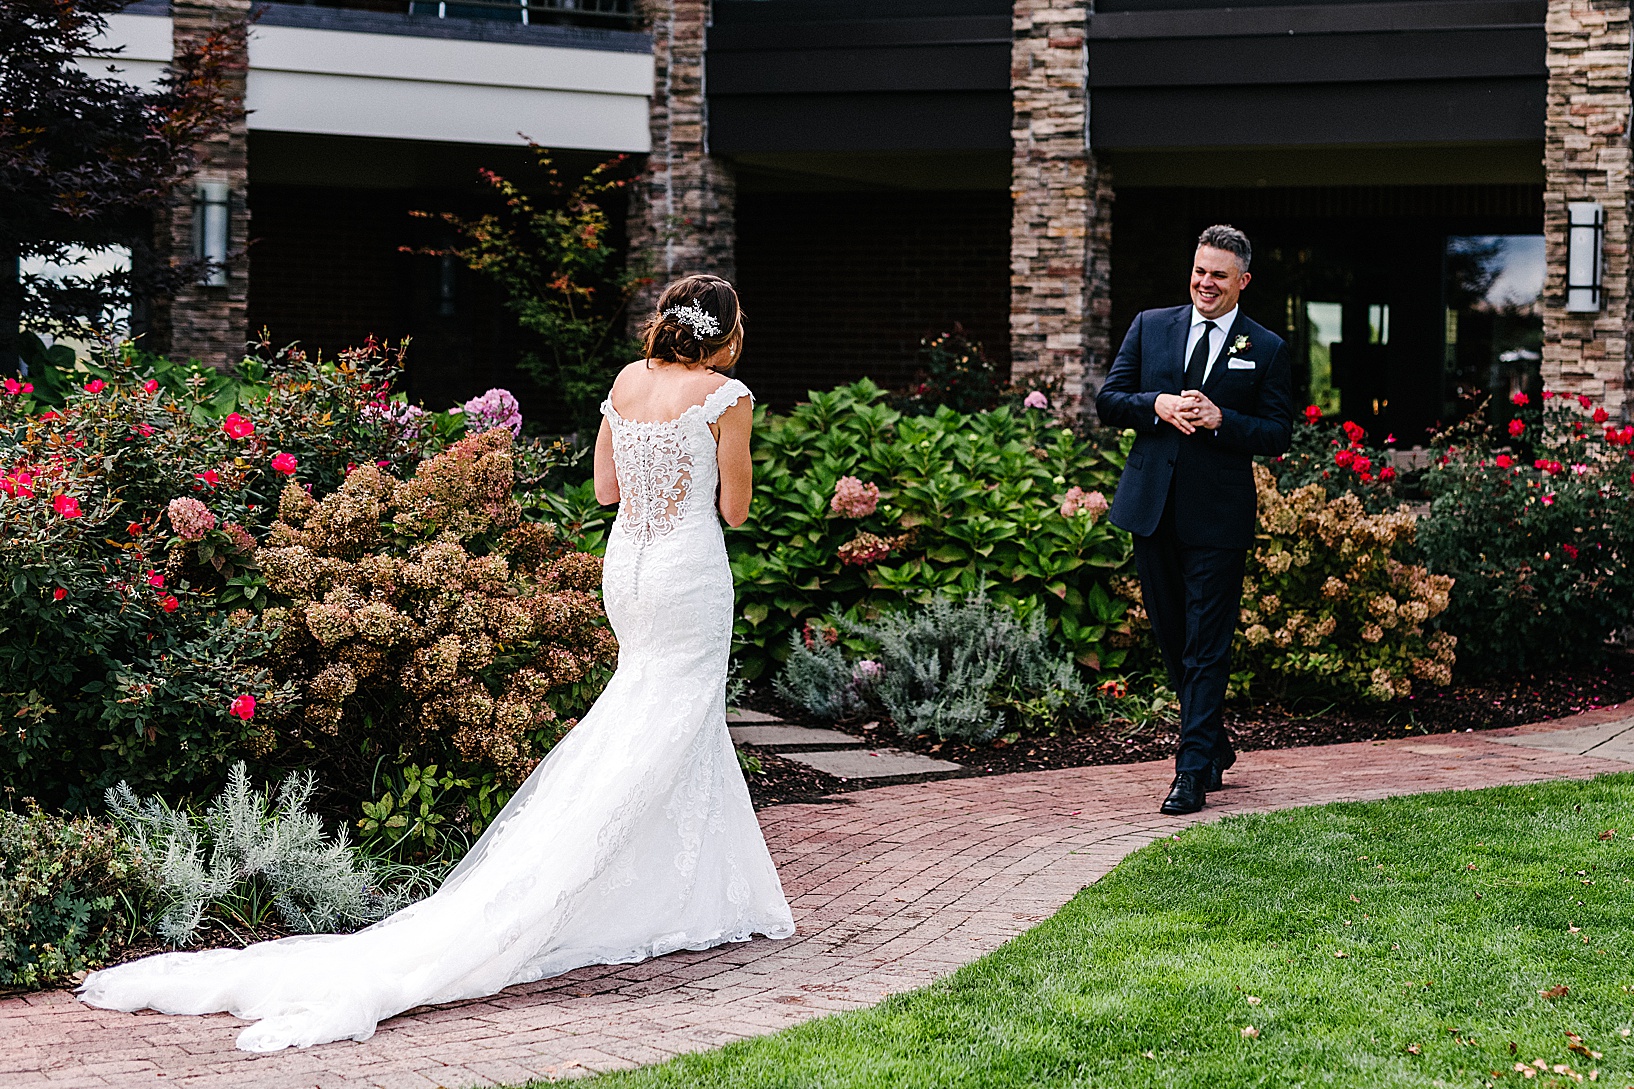 Groom smiles as he sees his bride for the first time, as she walks towards him down a red brick pathway